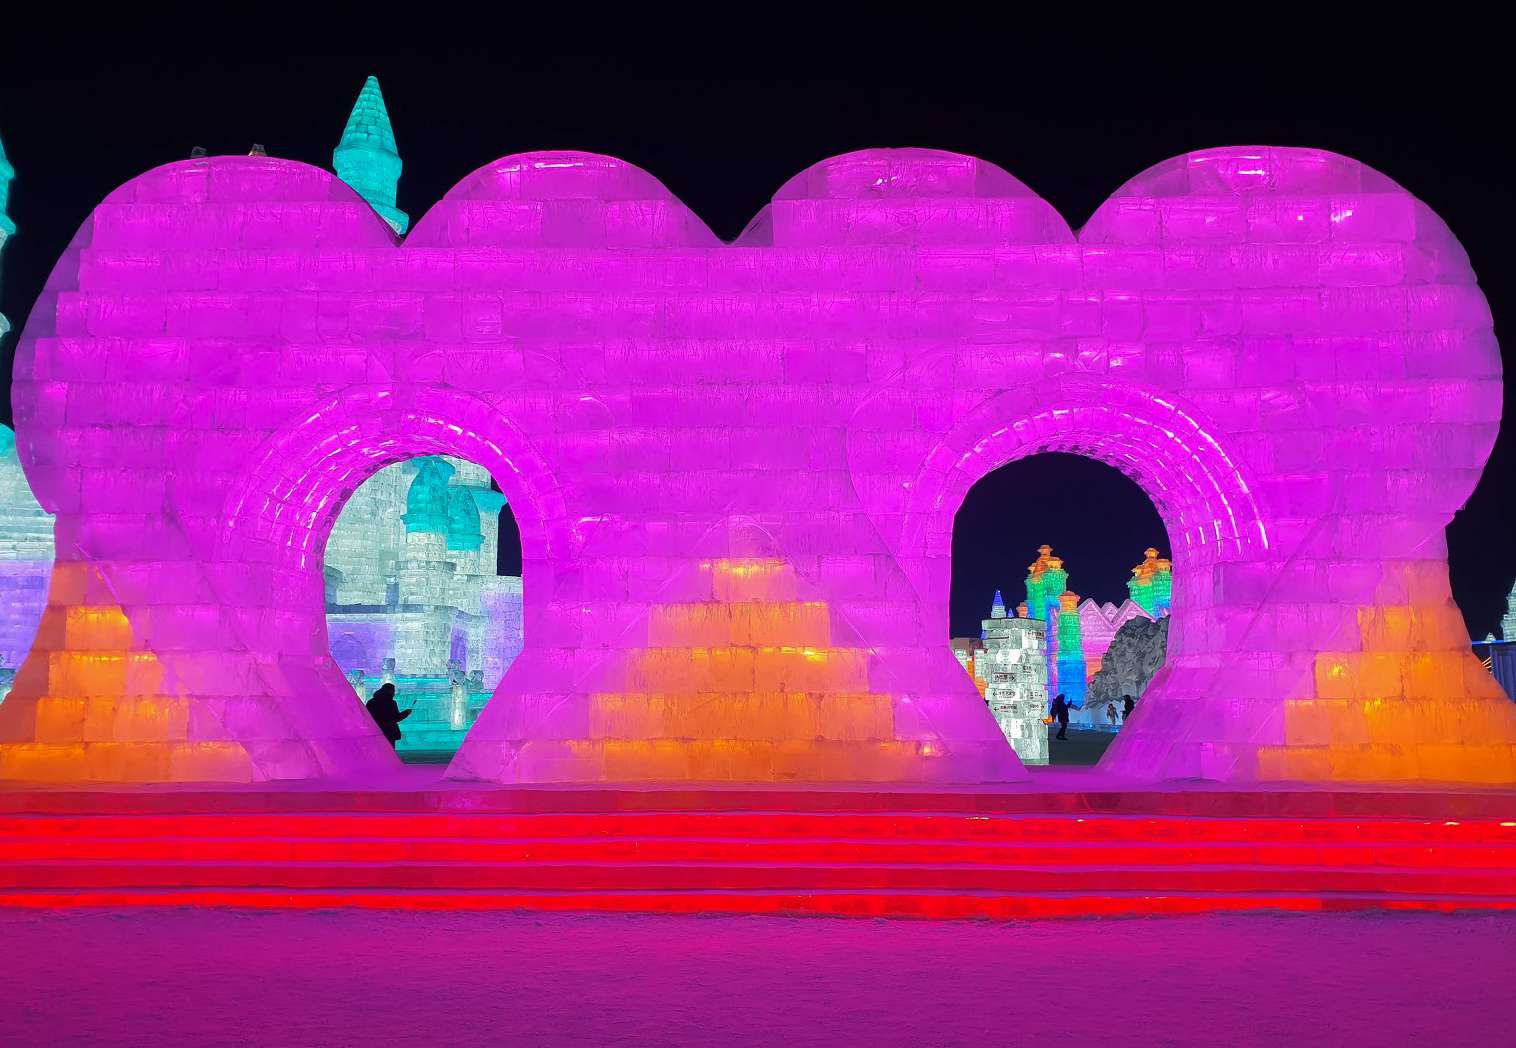 2 large loveheart ice sculptures lit in pink at Harbin Ice and Snow World